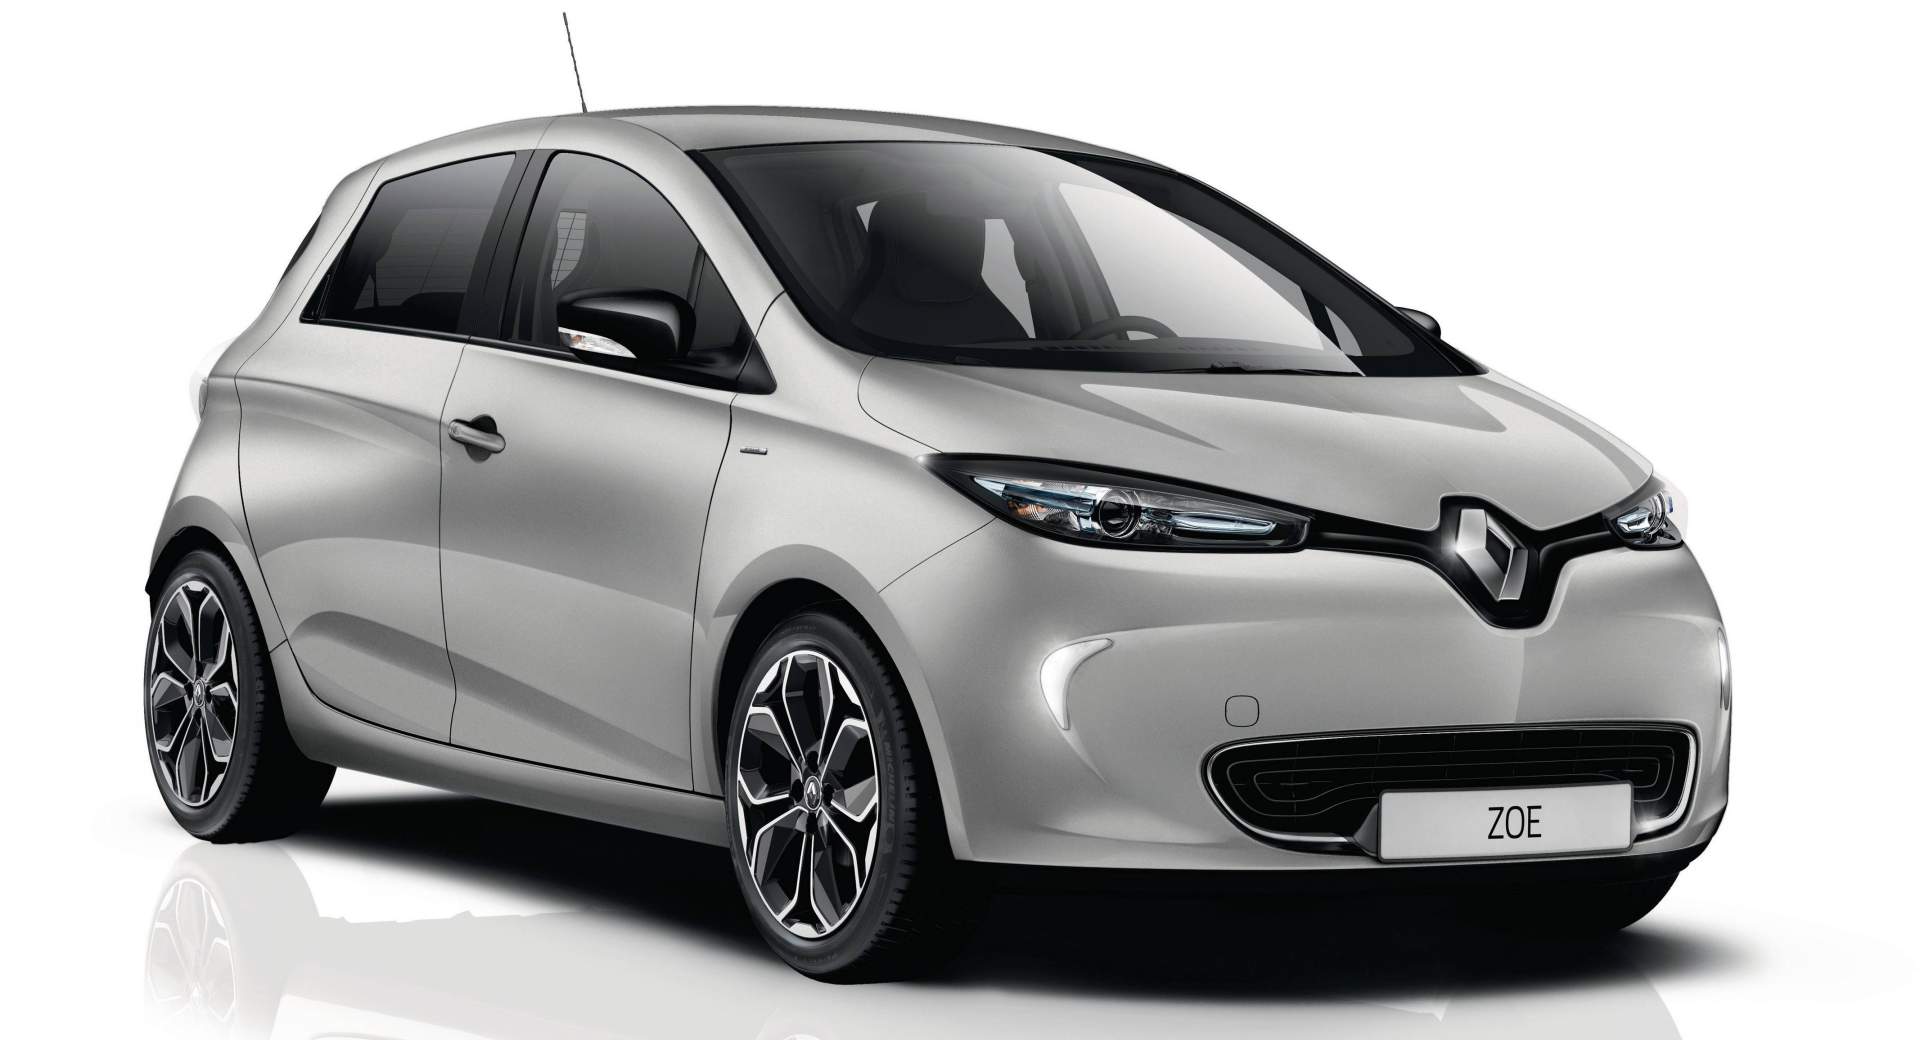 Renault Cements Zoe's Bestseller Status With “Iconic” Special Edition